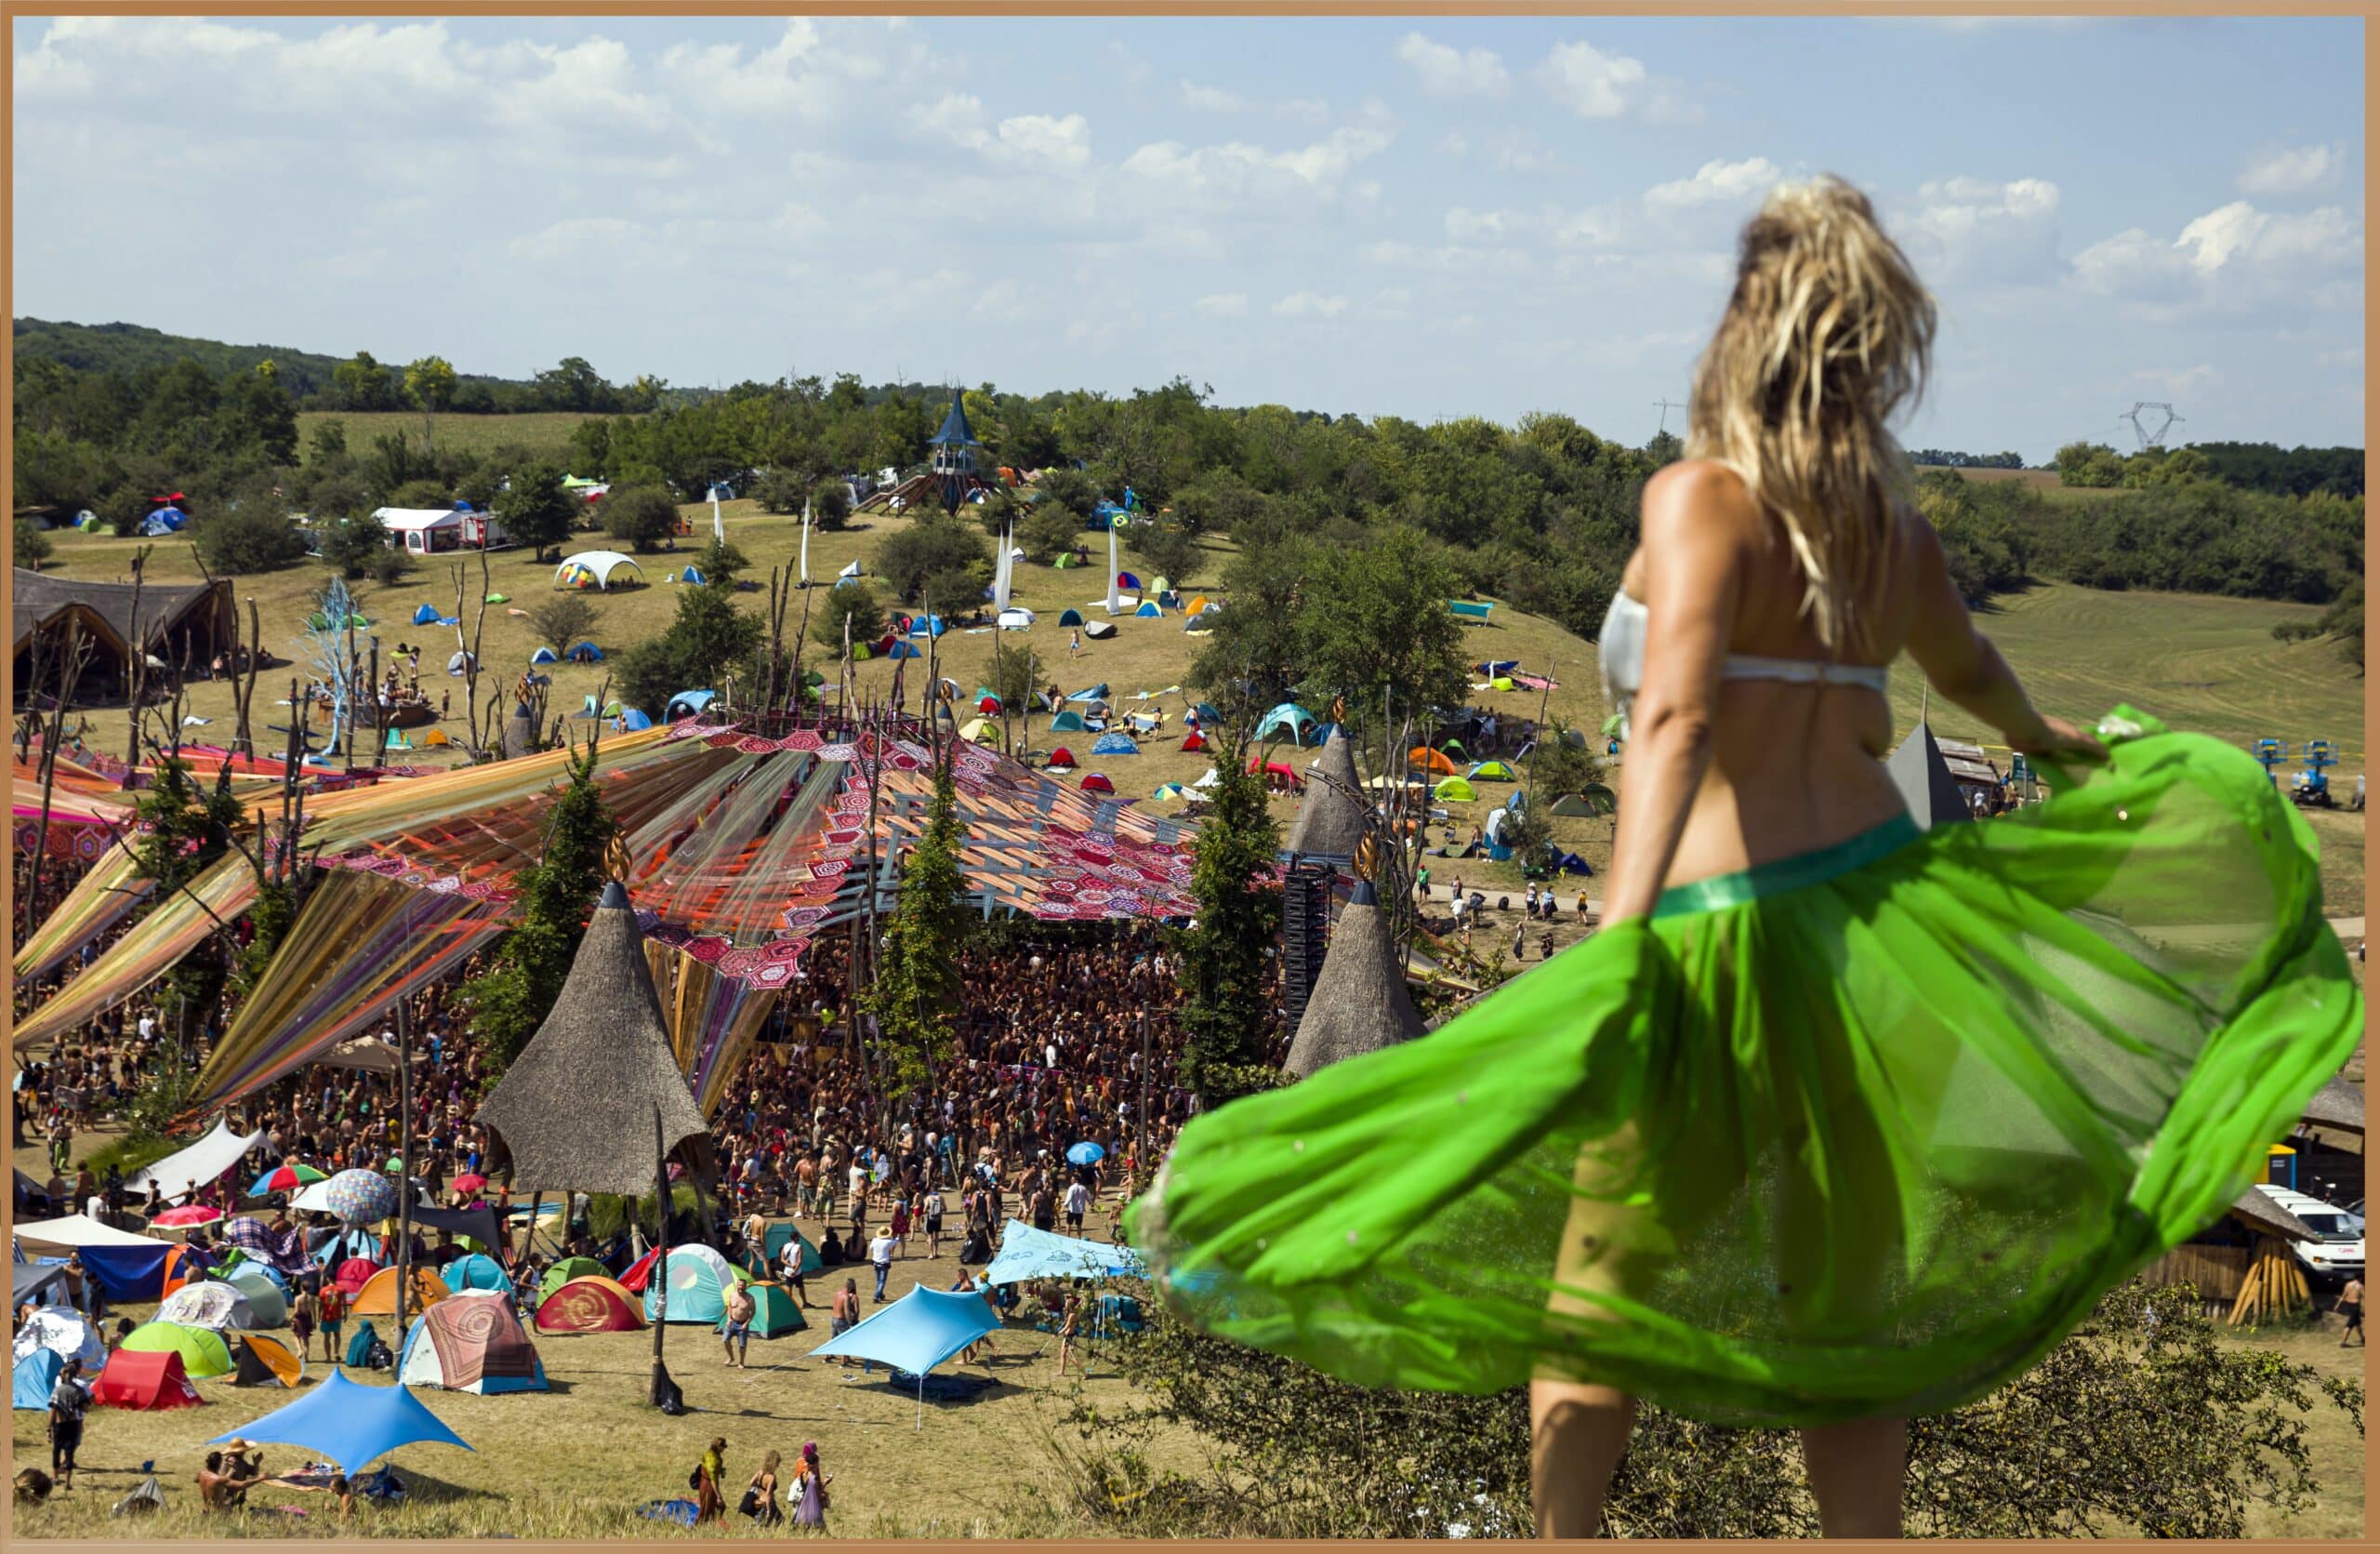 A woman in a green skirt overlooks the vibrant crowd and colorful setups at the O.Z.O.R.A. Festival in Hungary, showcasing the festival's lively atmosphere and artistic installations.